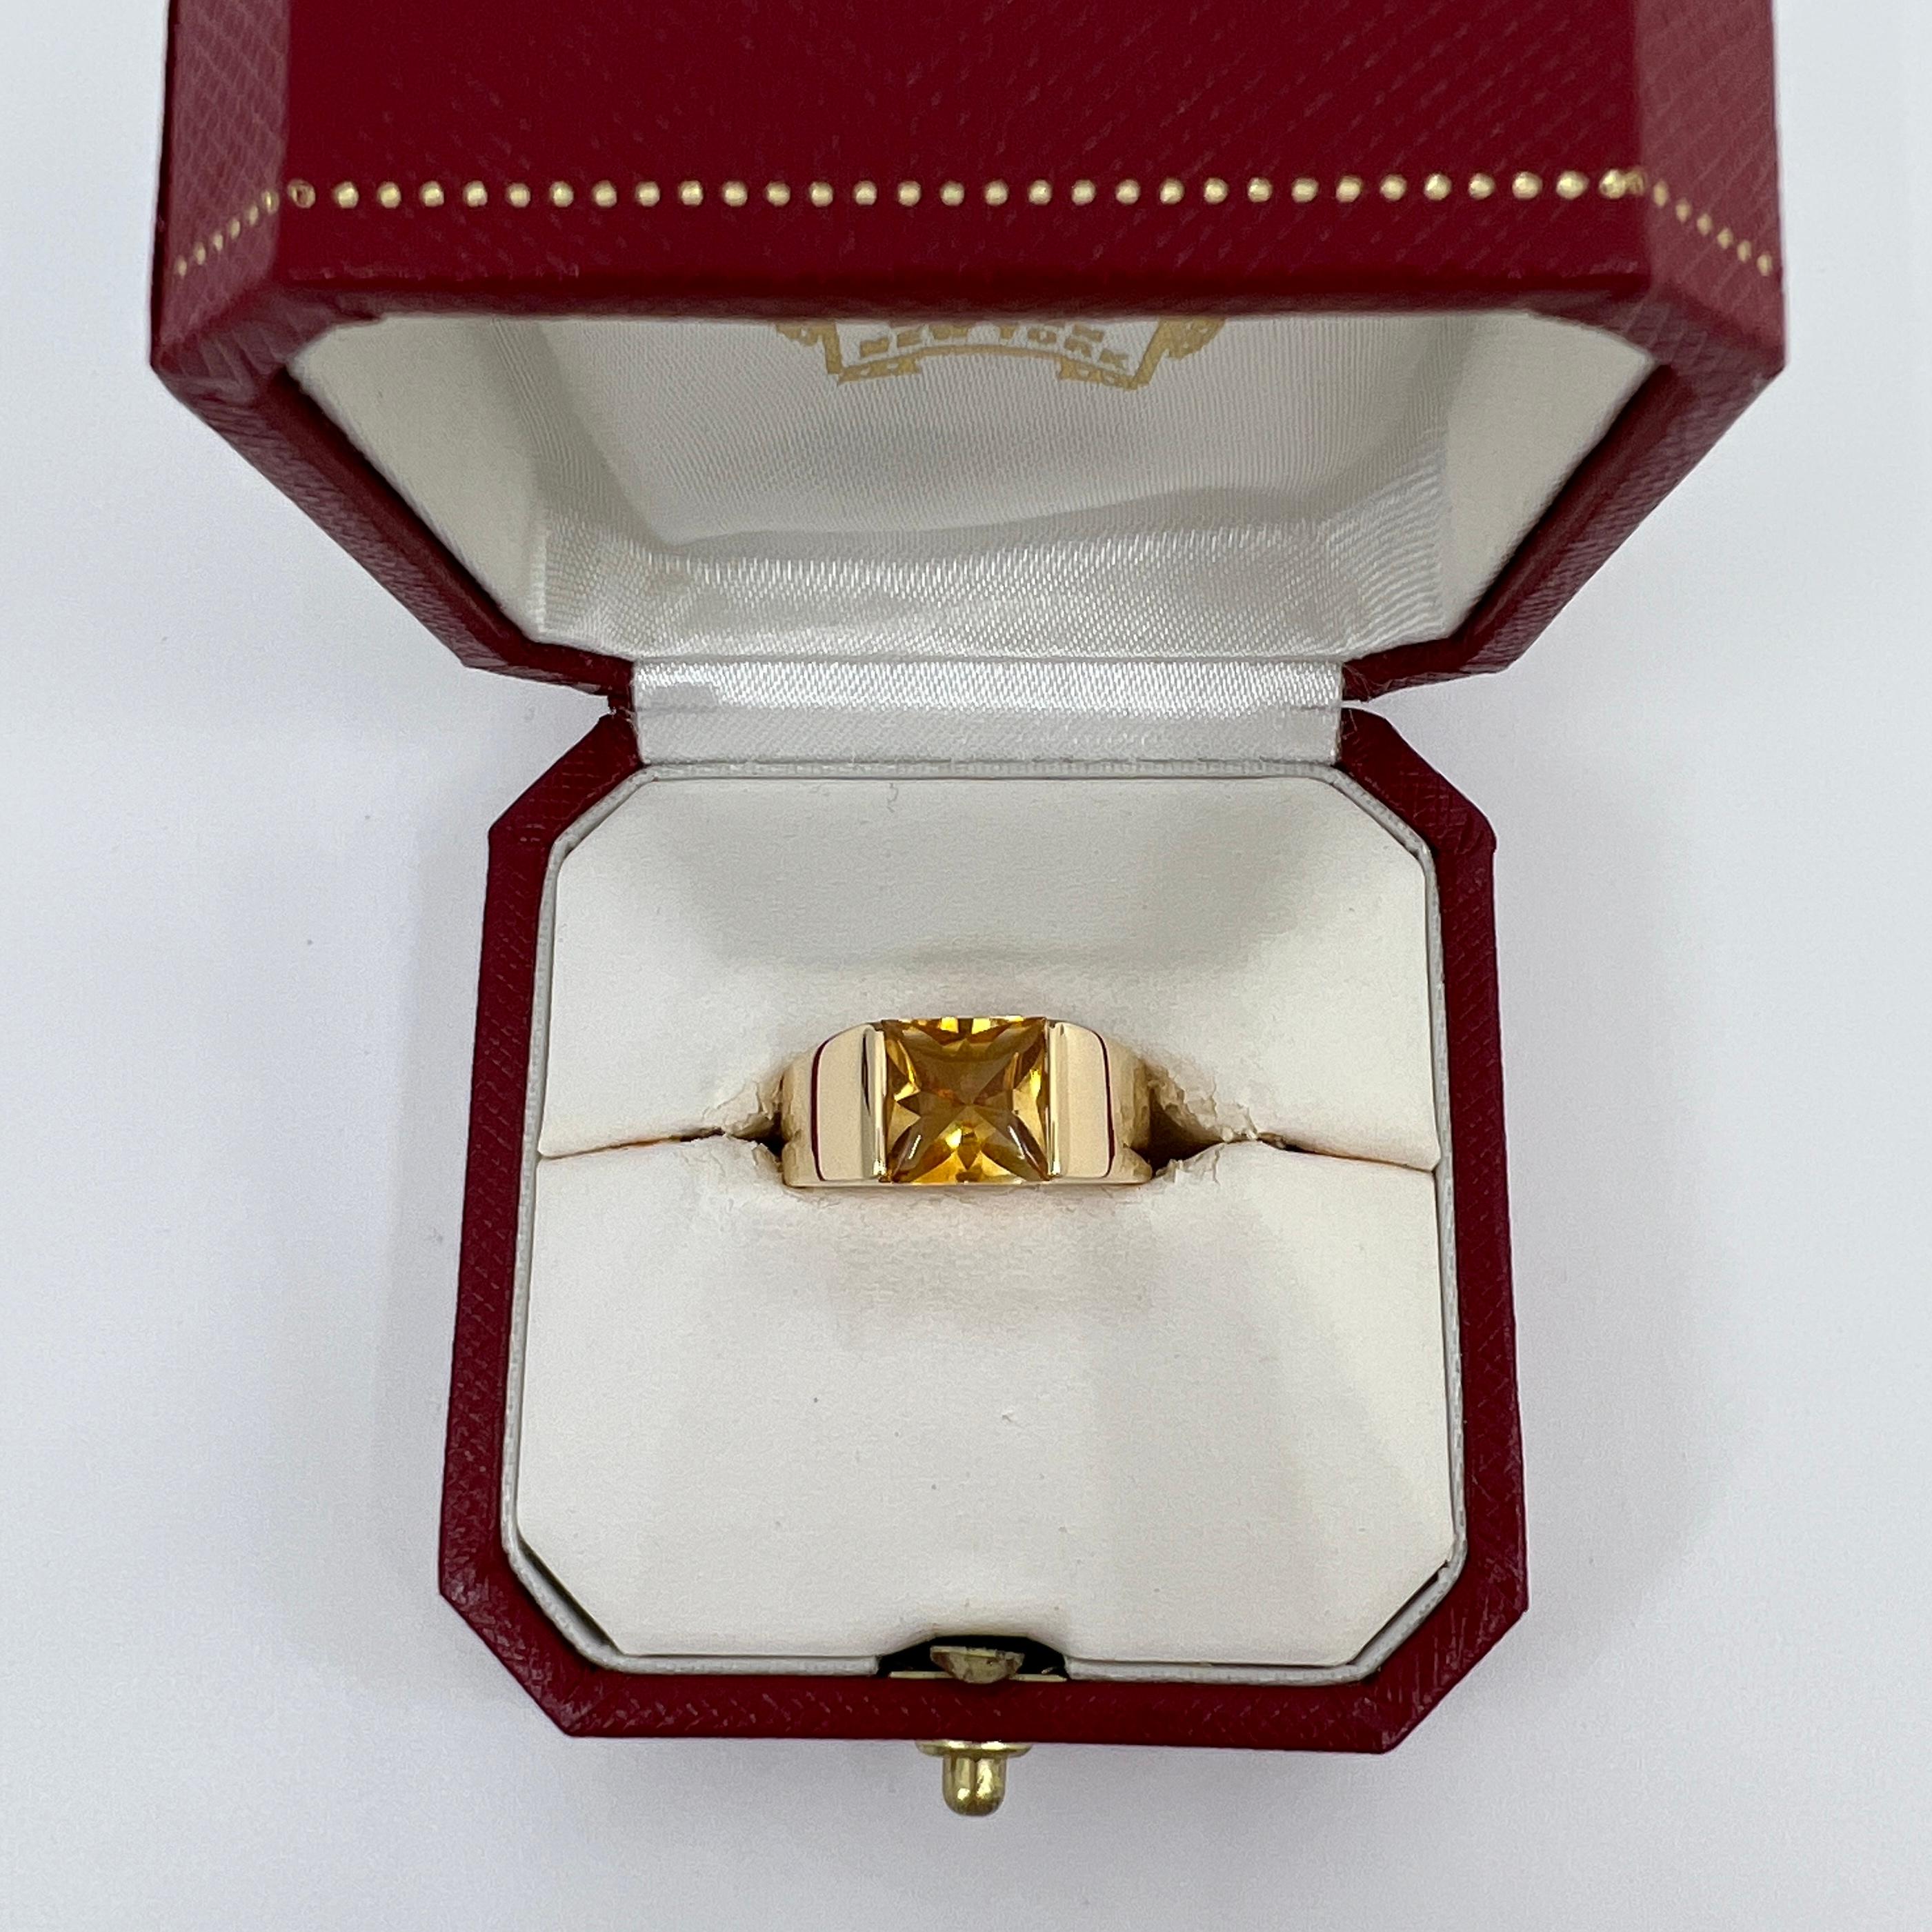 Cartier Vivid Yellow Citrine 18k Yellow Gold Tank Ring.

Stunning yellow gold ring with an 8mm tension set vivid yellow citrine. Fine jewellery houses like Cartier only use the finest of gemstones and this citrine is no exception. A top grade